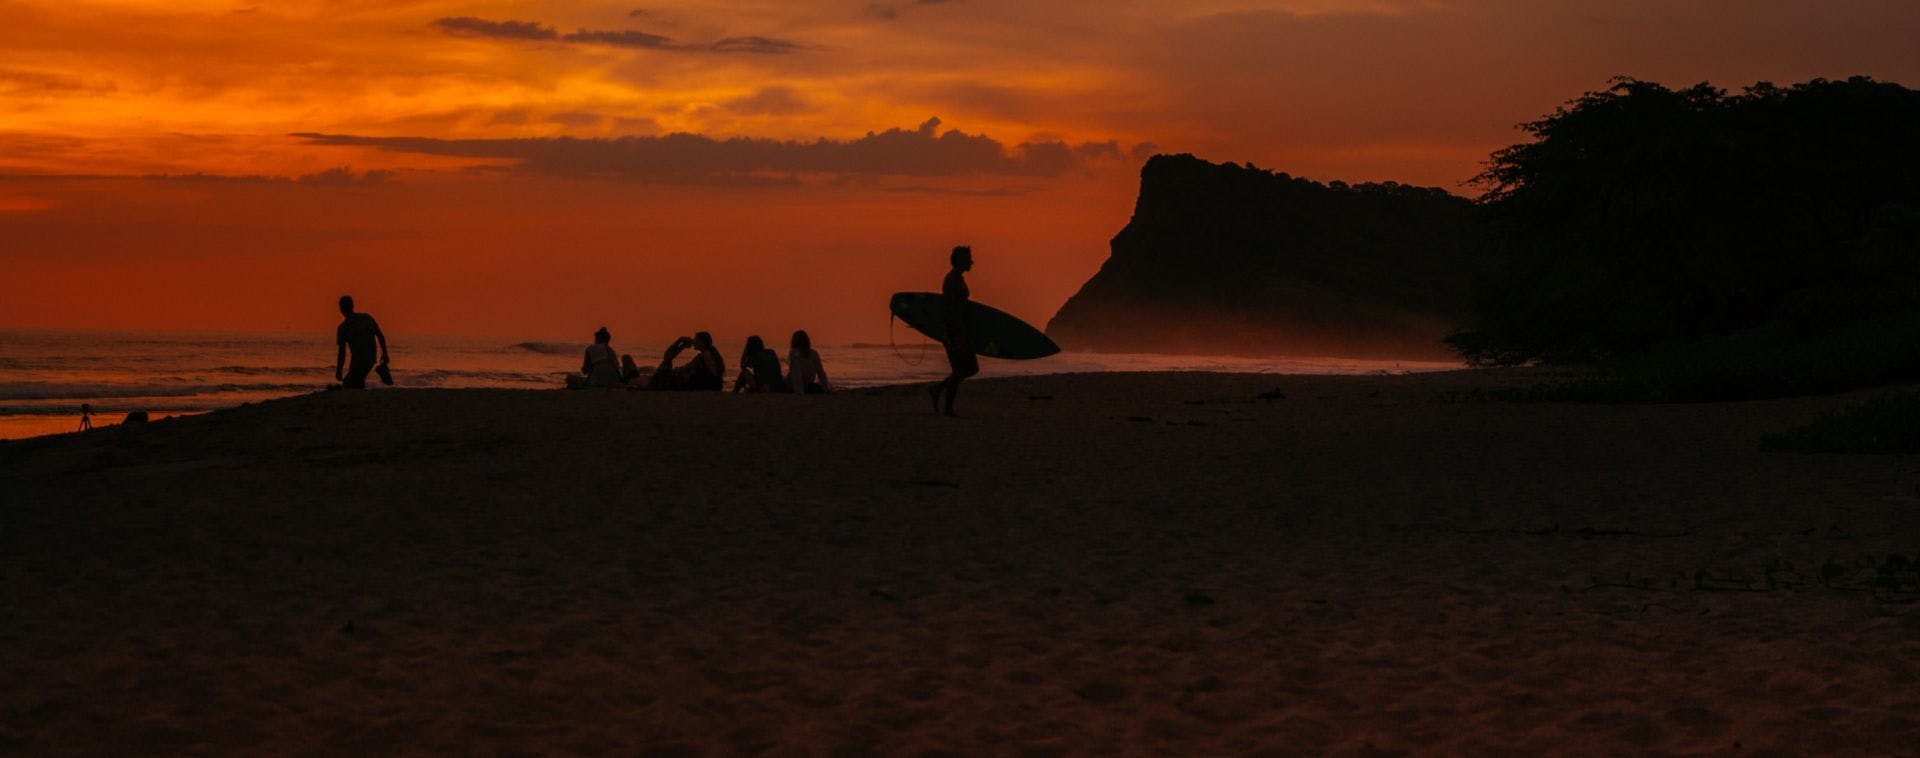 Coworking, Coliving and Surfing in Jiquilillo (Nicaragua)